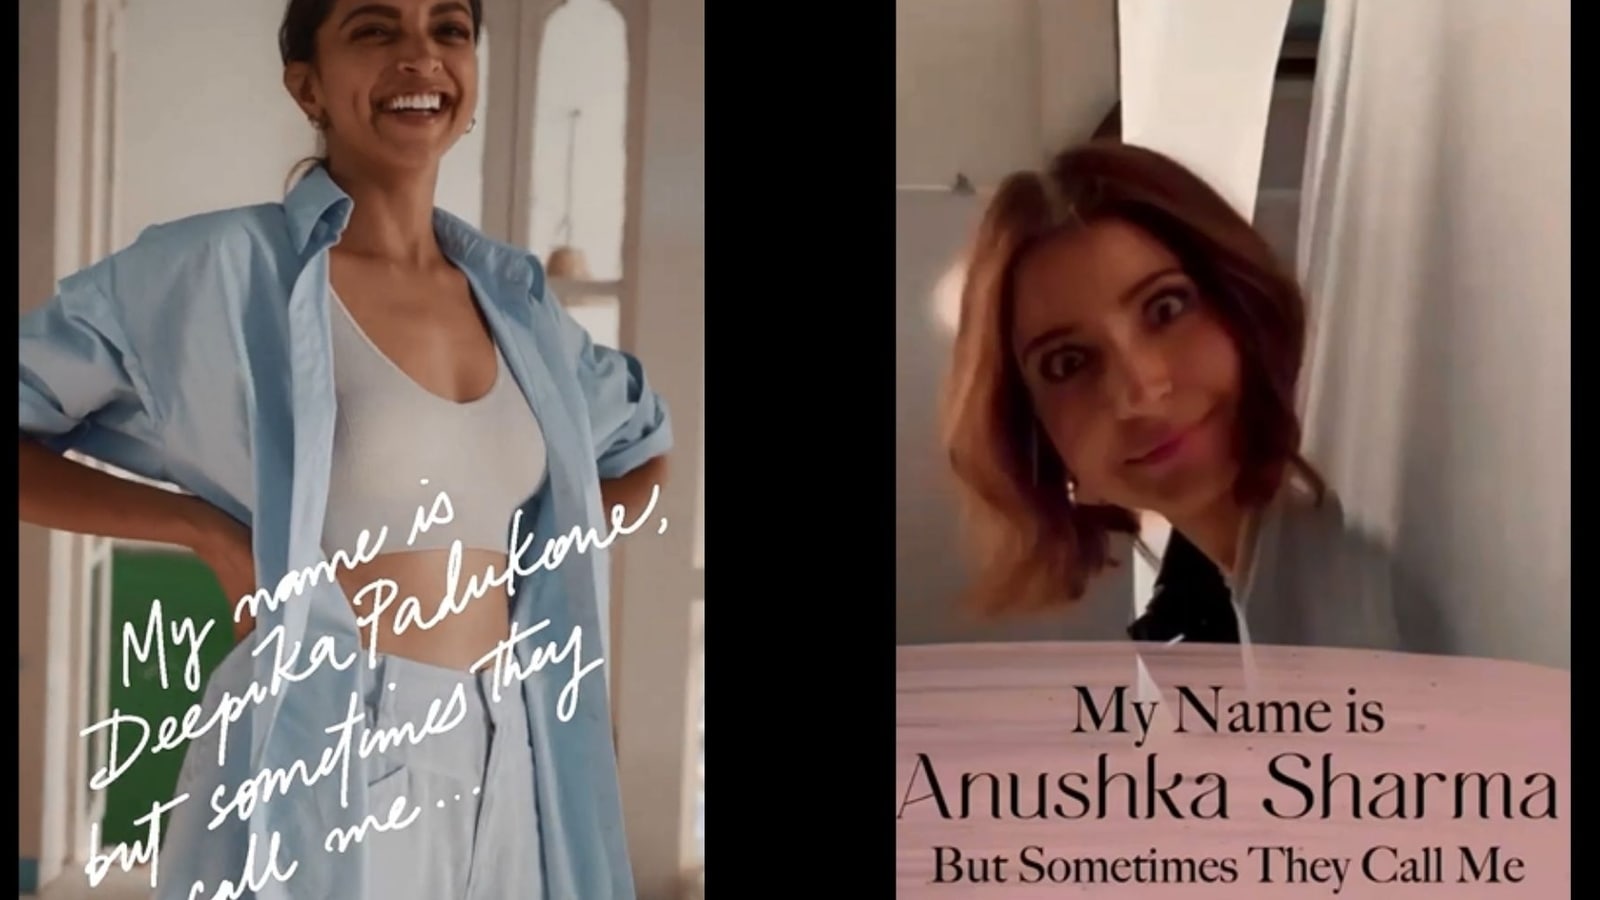 Bollywood actors take part in 'That's Not My Name' viral trend ...